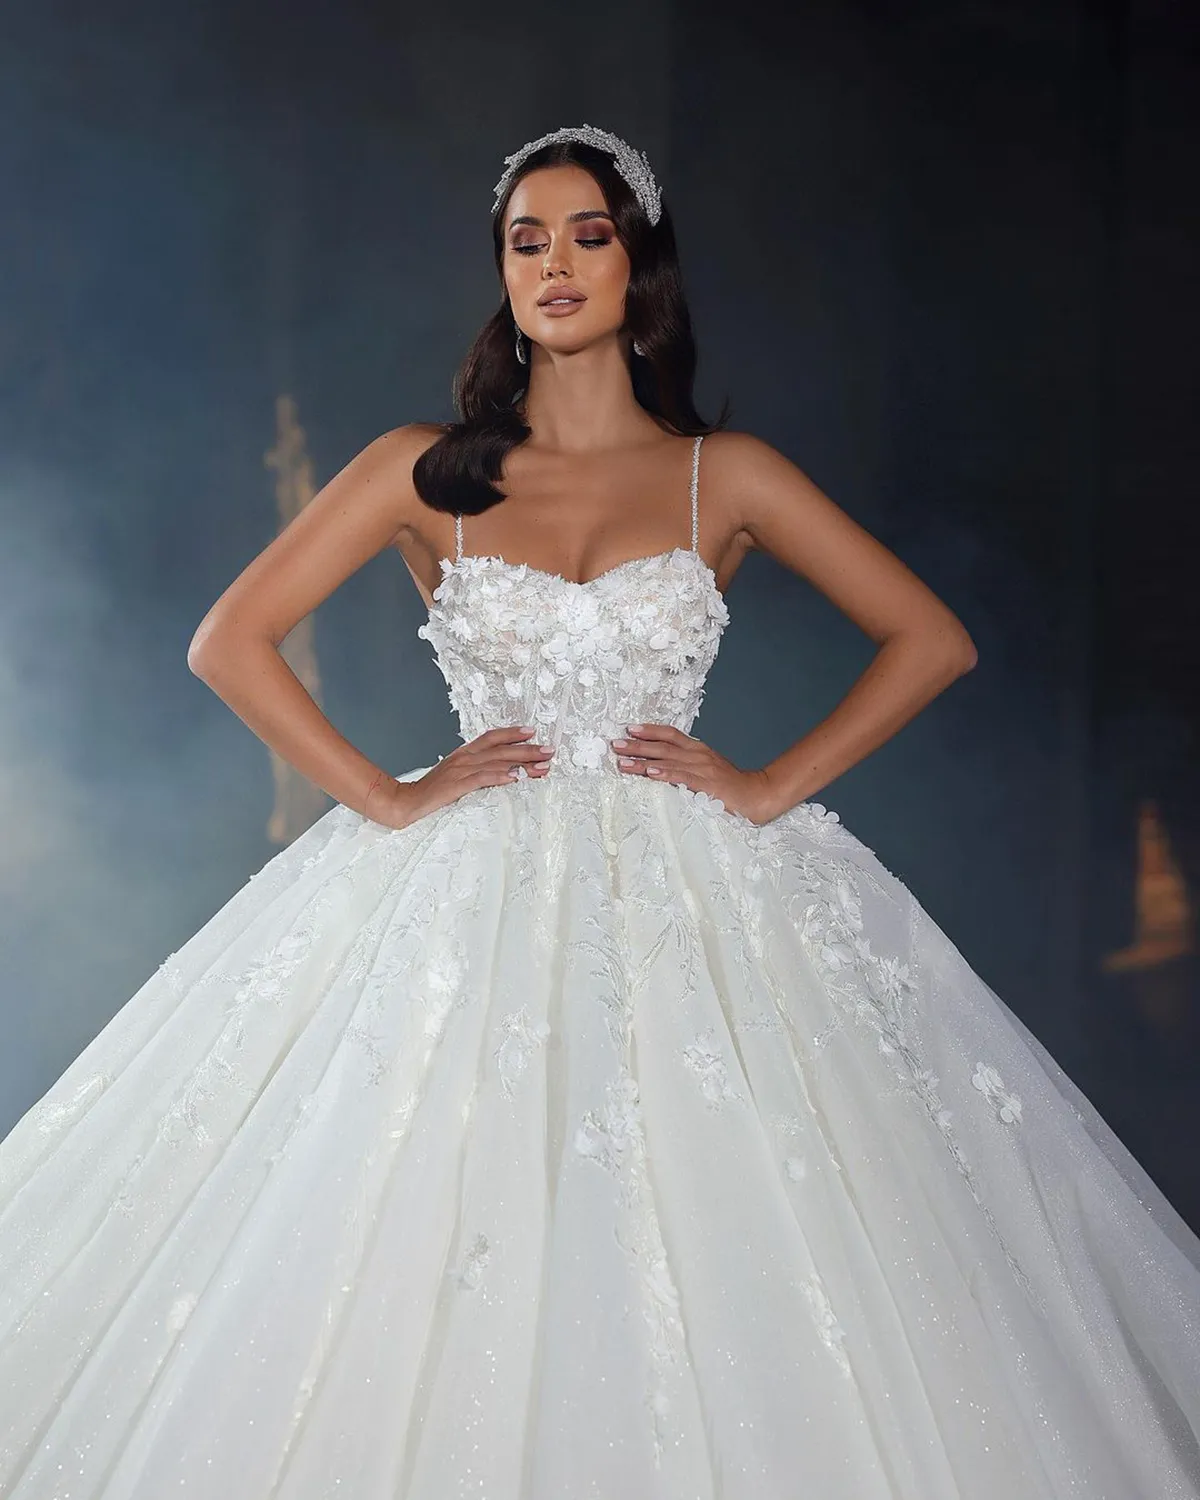 Luxurious Ball Gown Wedding Dresses Sweetheart Sleeveless Lace 3D-Floral Applicants Backless Layered Tulle Court Sown Custom Made Plus Side Vestidos De Novia